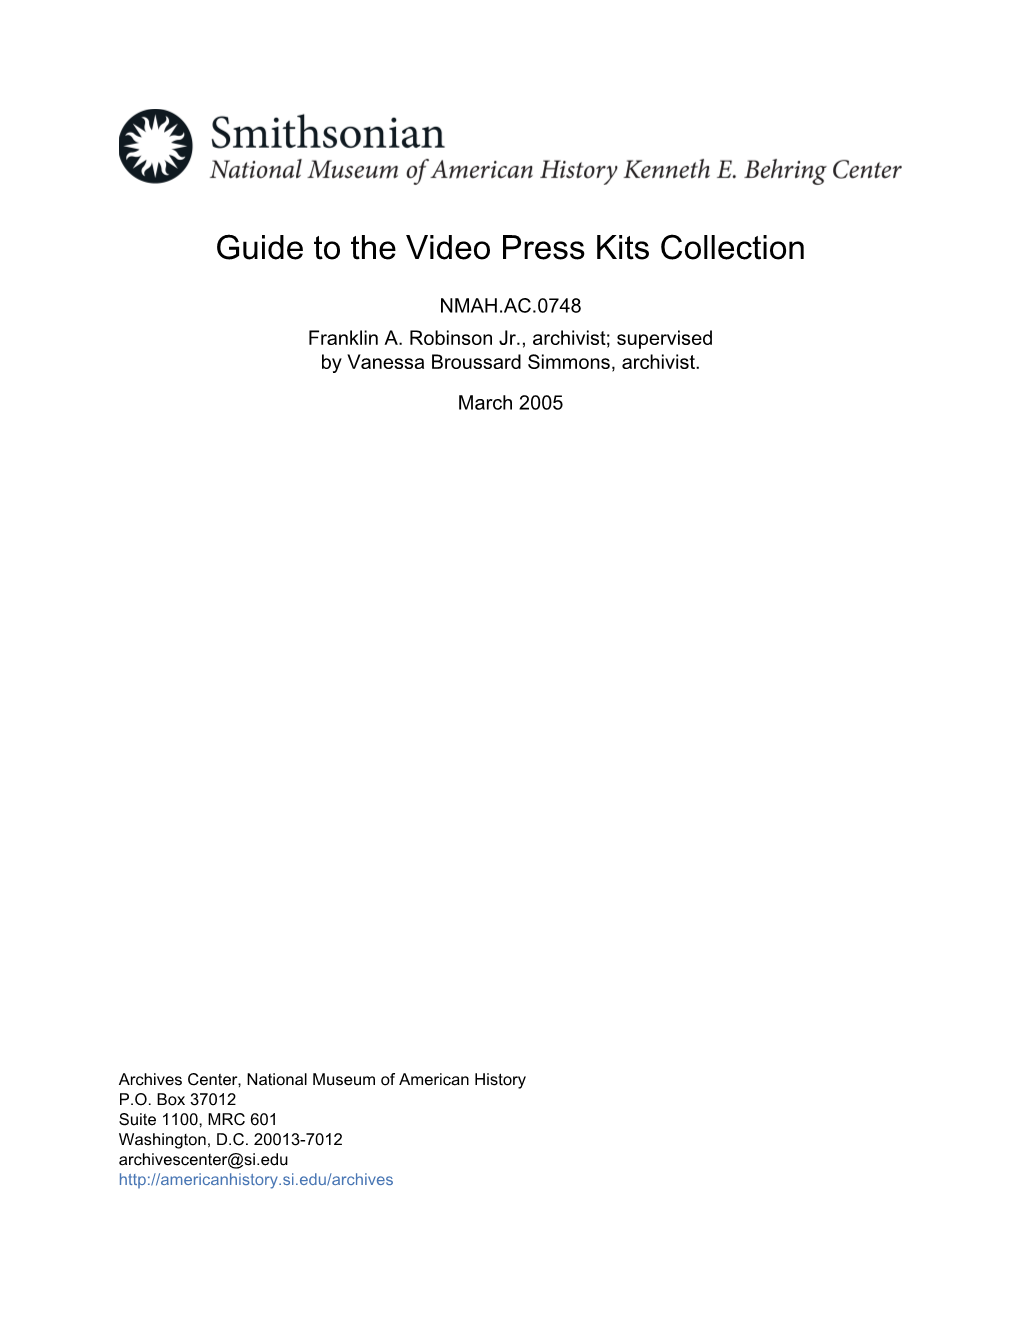 Guide to the Video Press Kits Collection